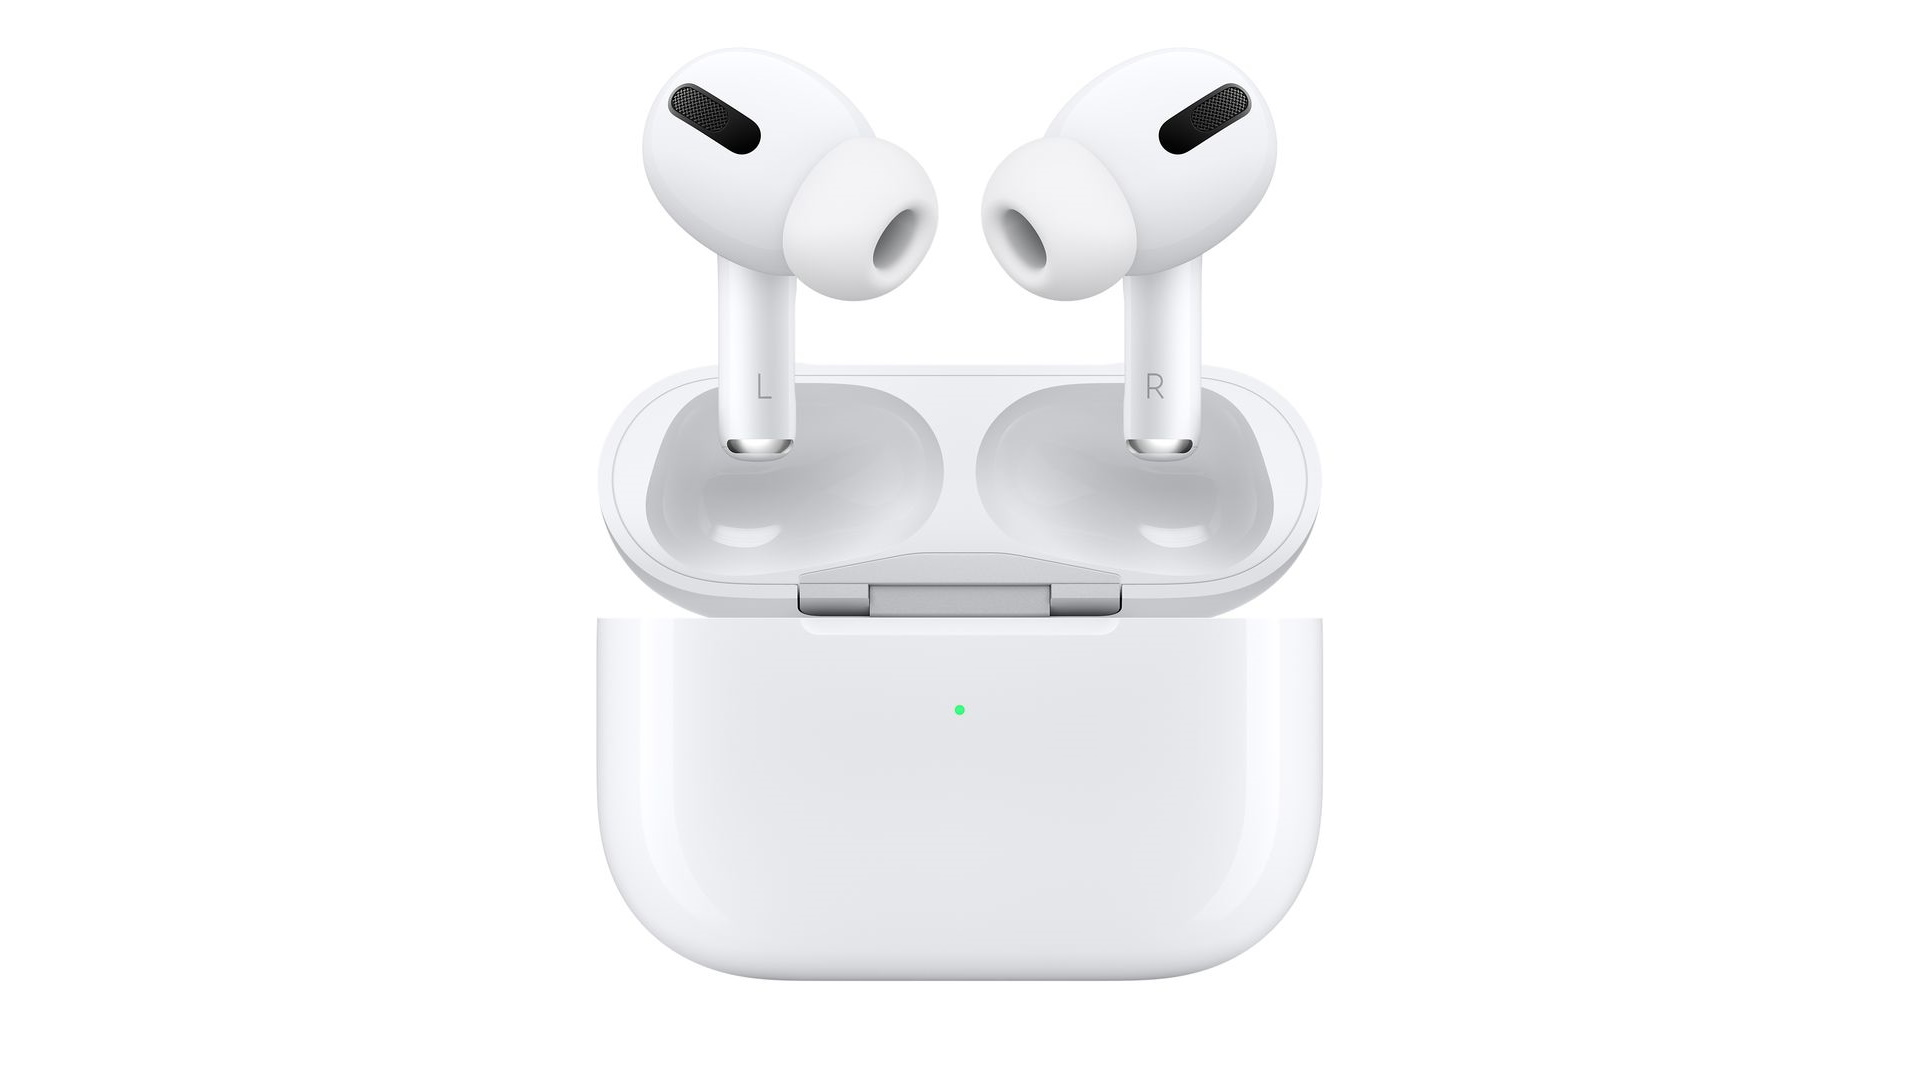 the apple airpods pro wireless earbuds